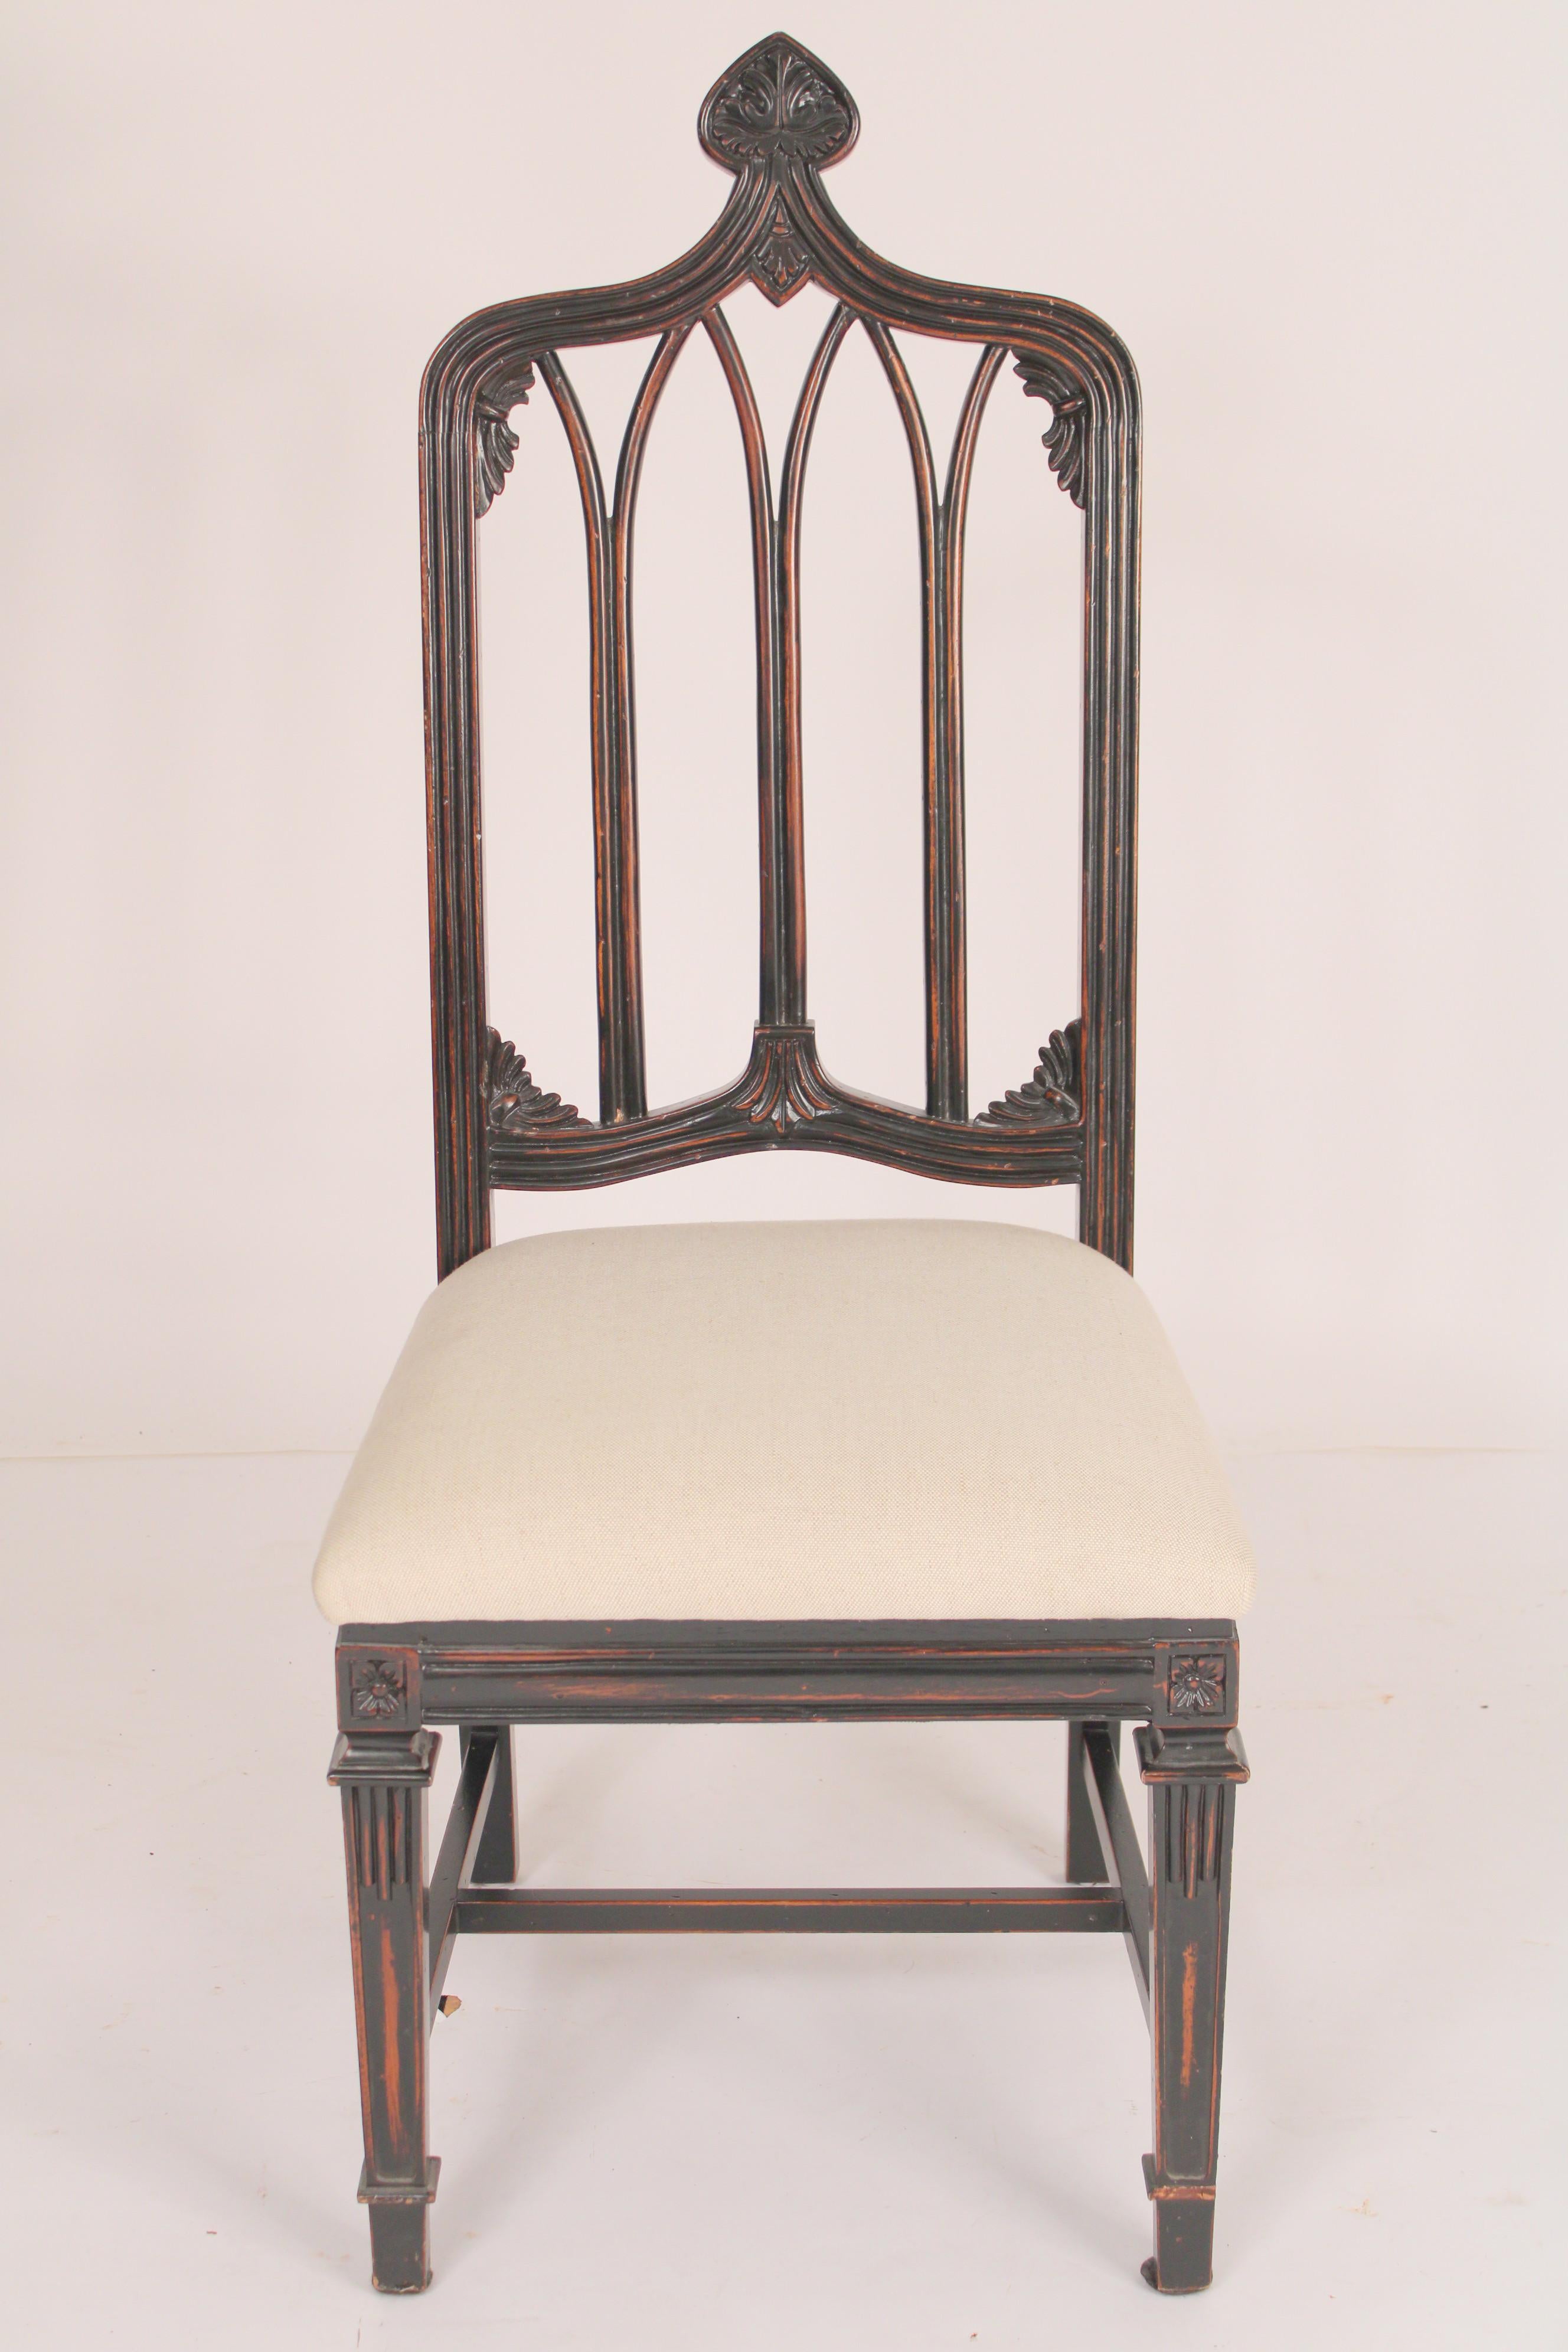 Set of 6 gothic revival ebonized dining room chairs, late 20th century.